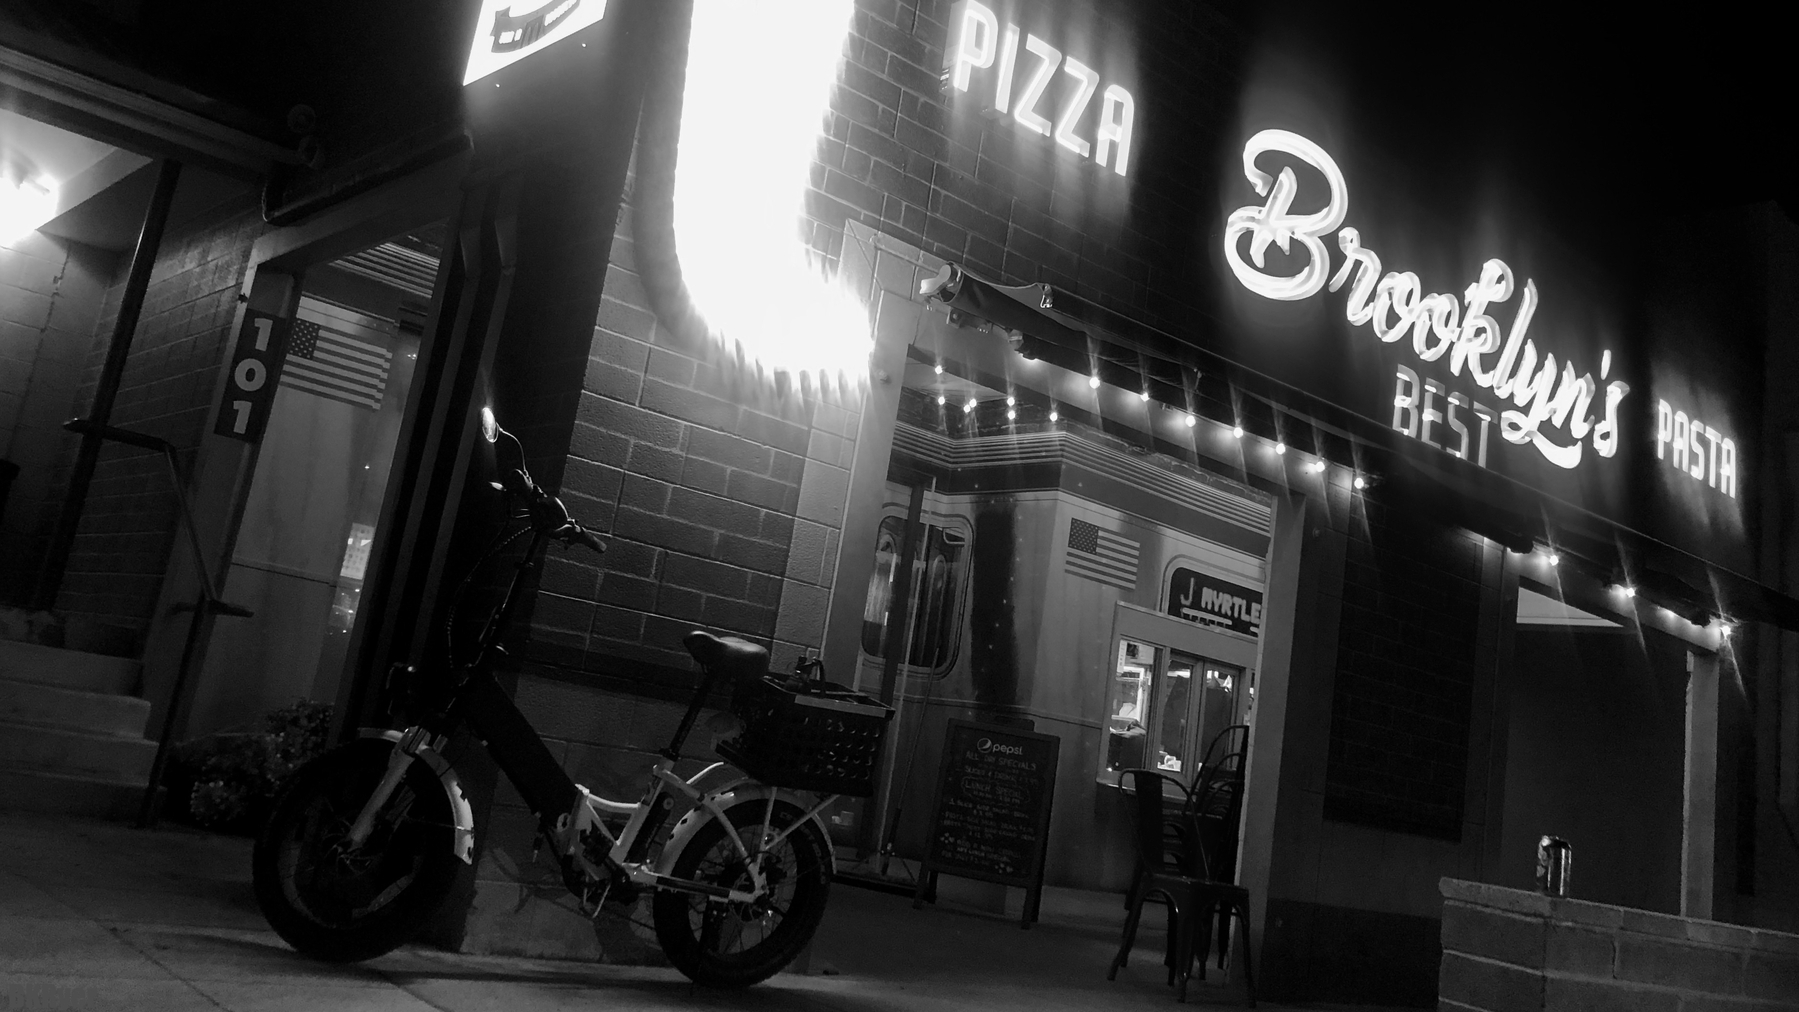 Brooklyn’s Best - Pizza restaurant with large neon sign and e-bike. 